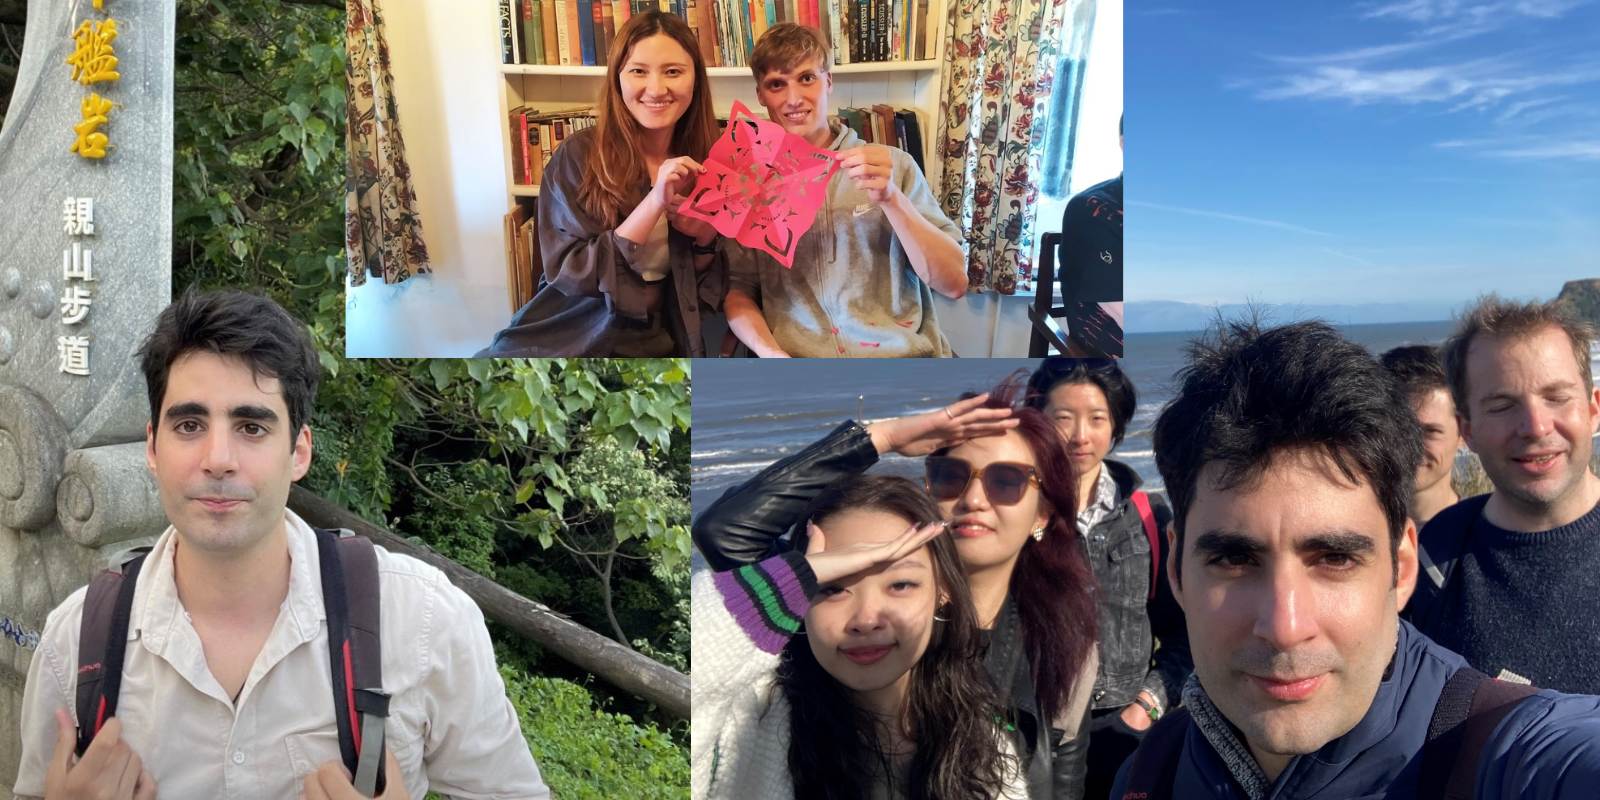 Collage shows Mischa on a hike in Taiwan and with Chinese friends outside, and two smiling people holding a paper cut design.